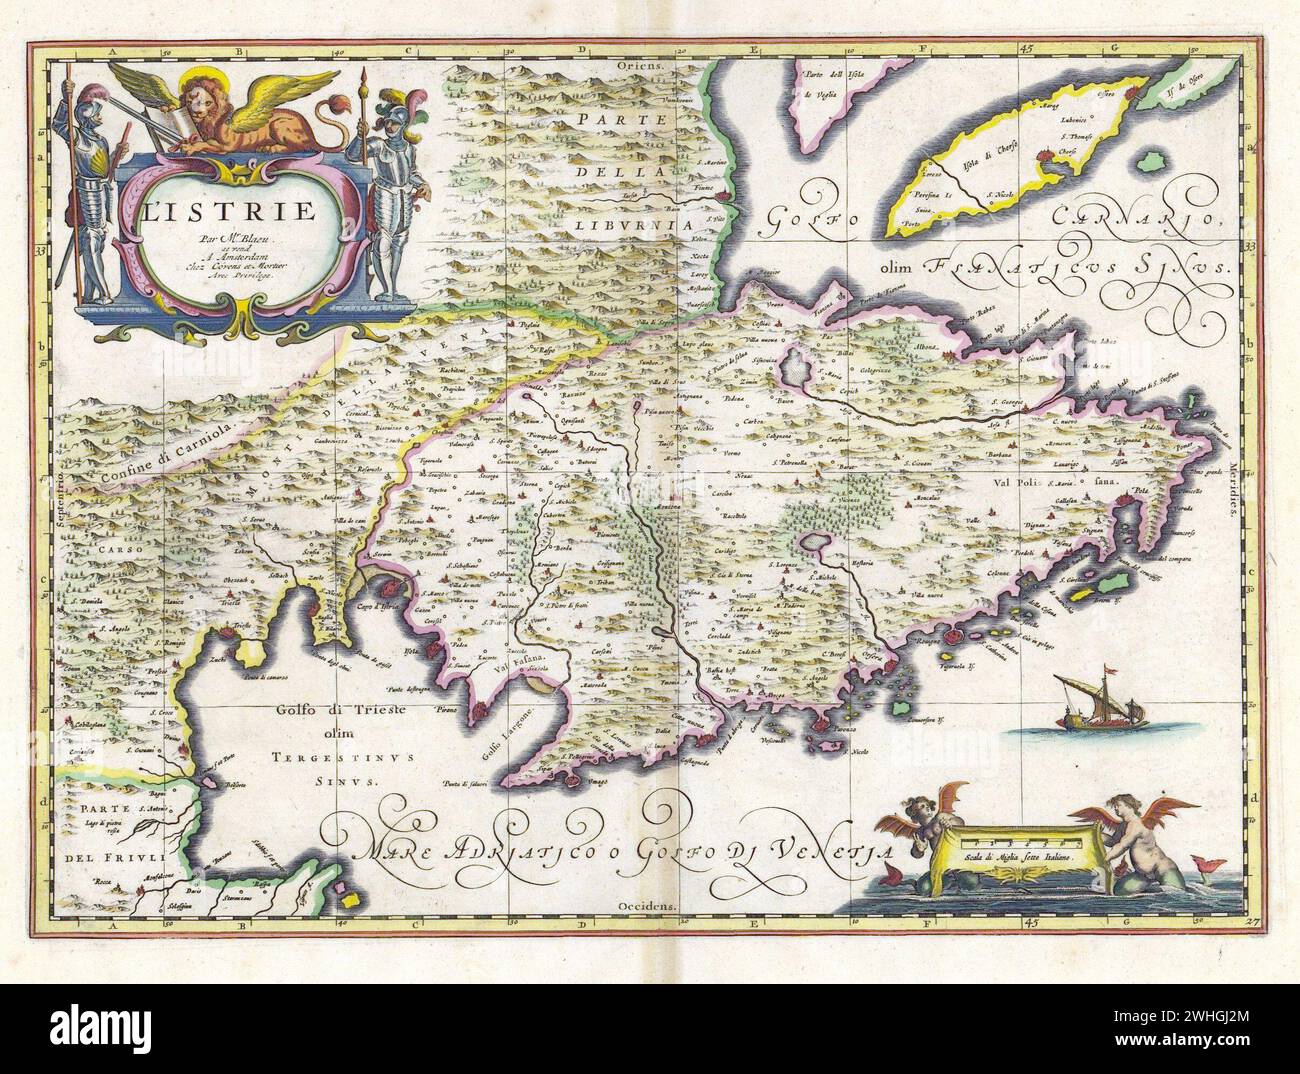 old map of Istria, Adriatic Sea Willem and Johannes Joan  Blaeu, 17th century Stock Photo